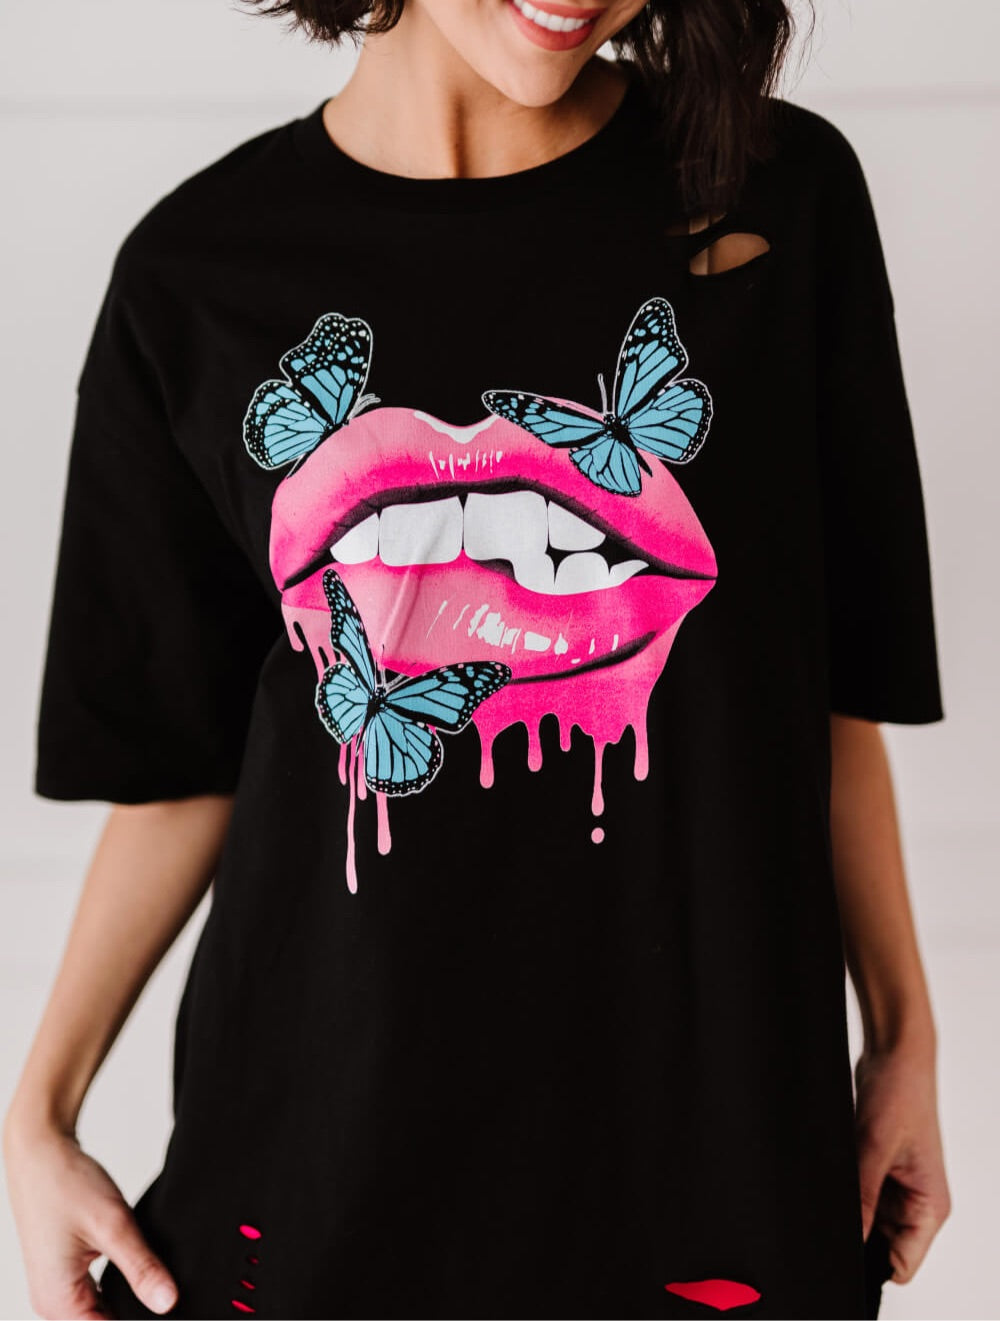 Butterfly graphic tee